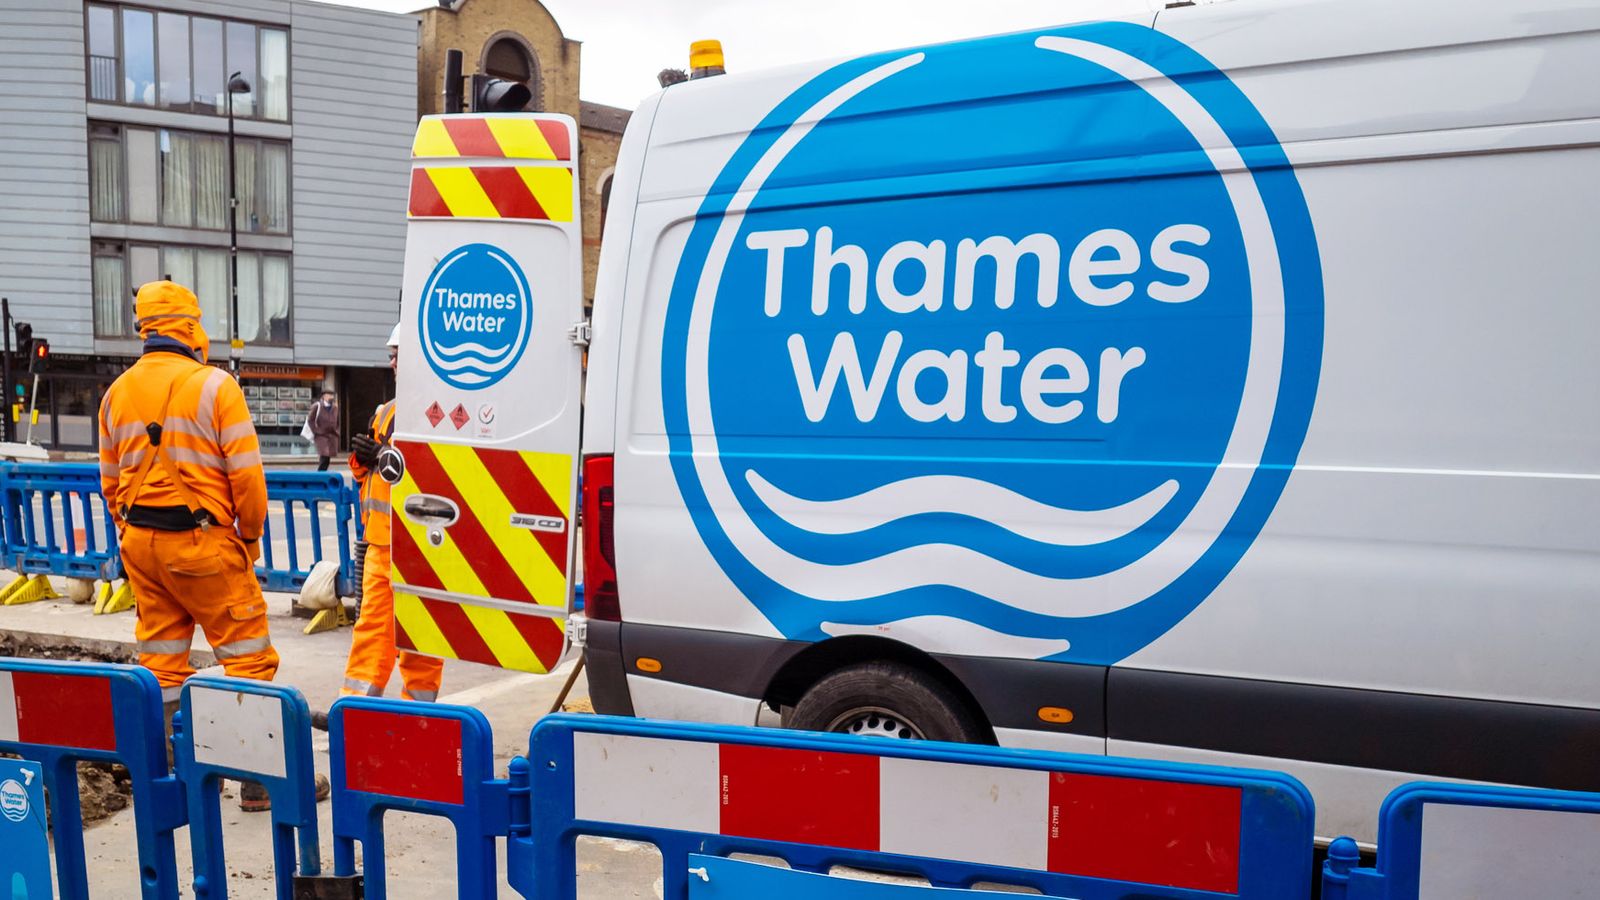 Thames Water pays £37.5m dividend amid debt pile and pollution fines, sparking Ofwat query